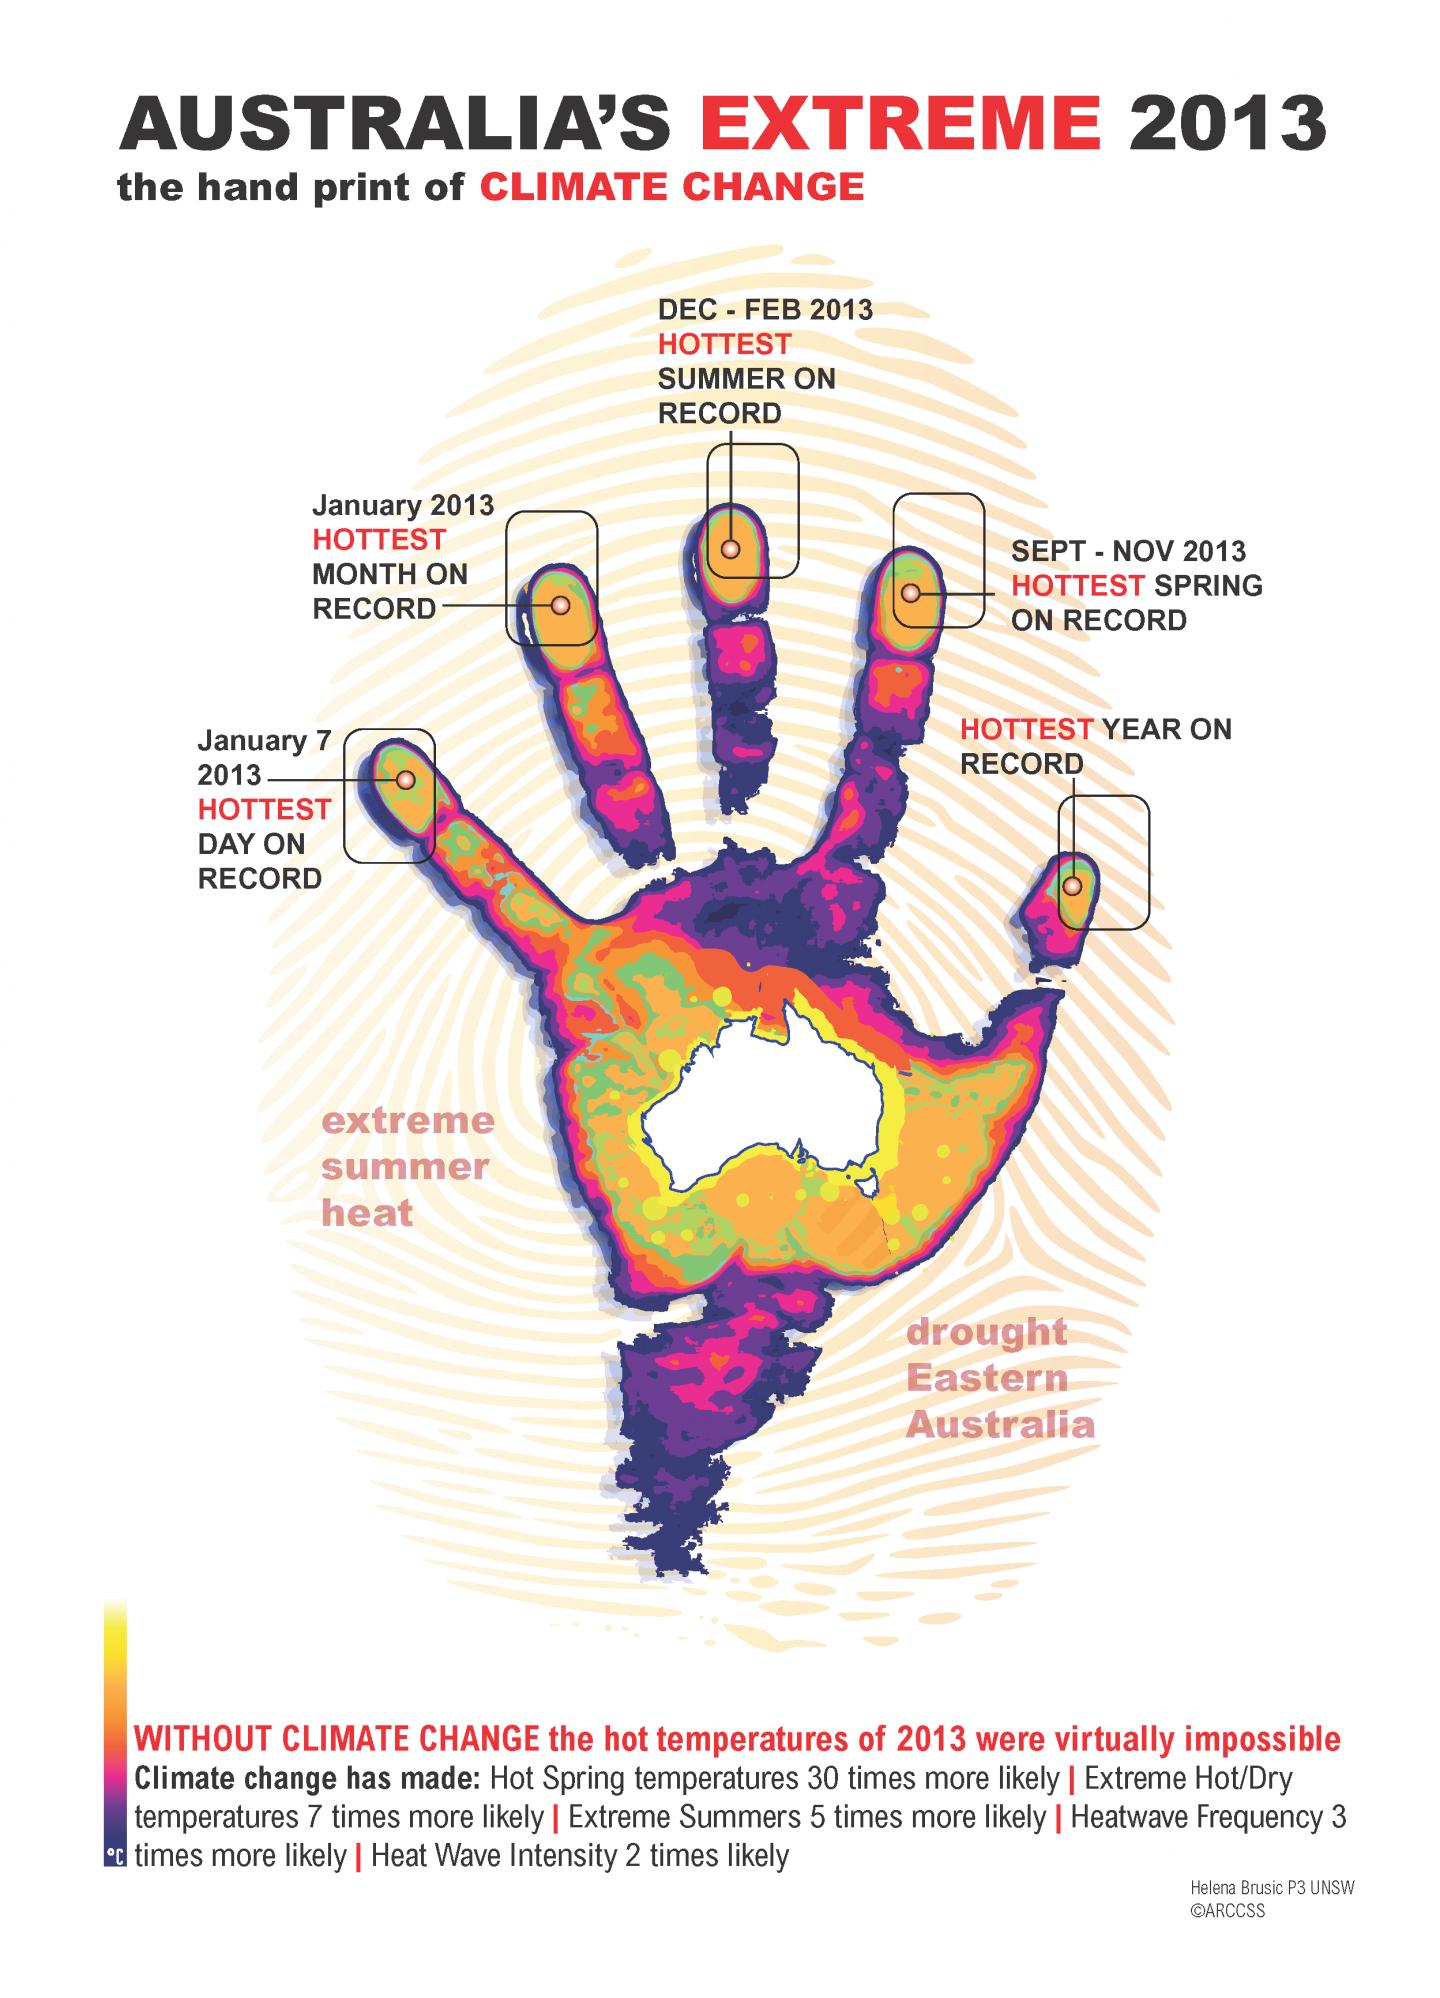 The Handprint of Climate Change in Australia